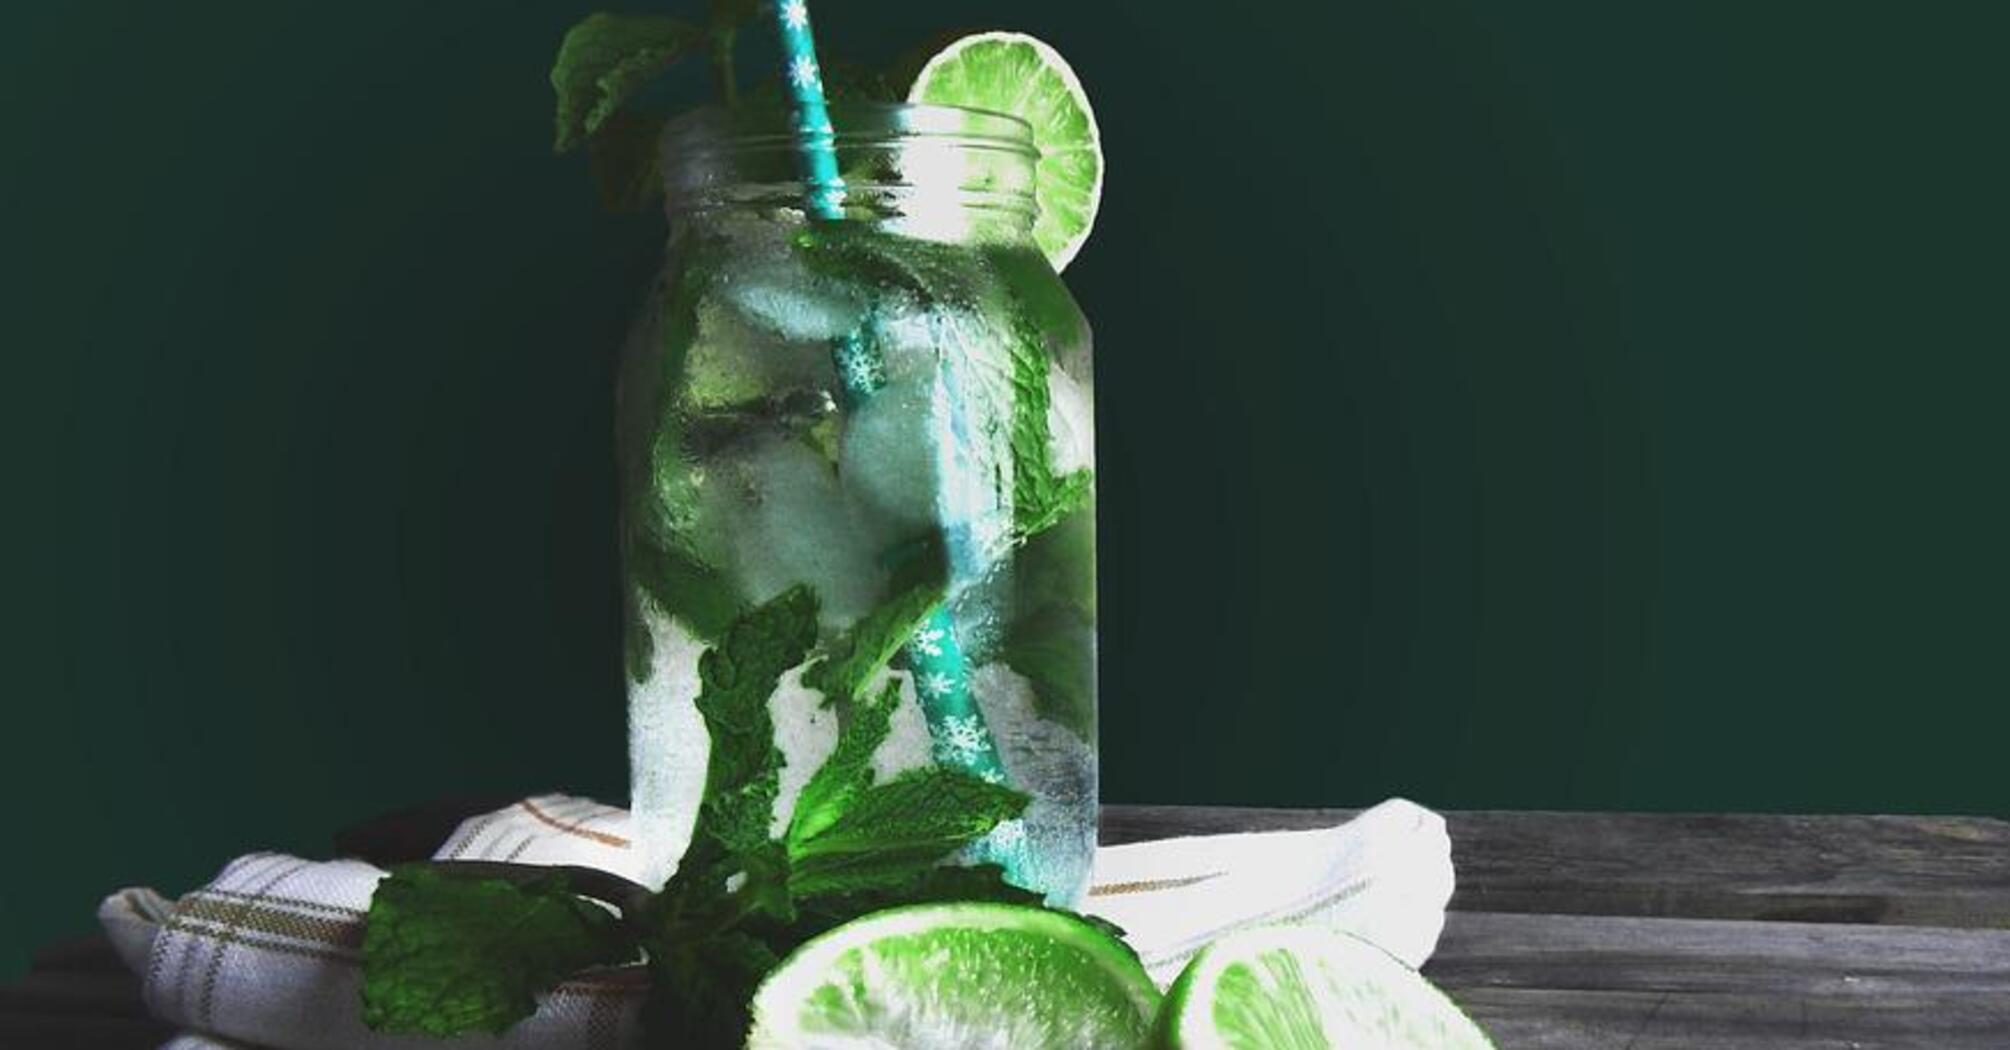 Cool non-alcoholic mojito: how to make a popular cocktail at home